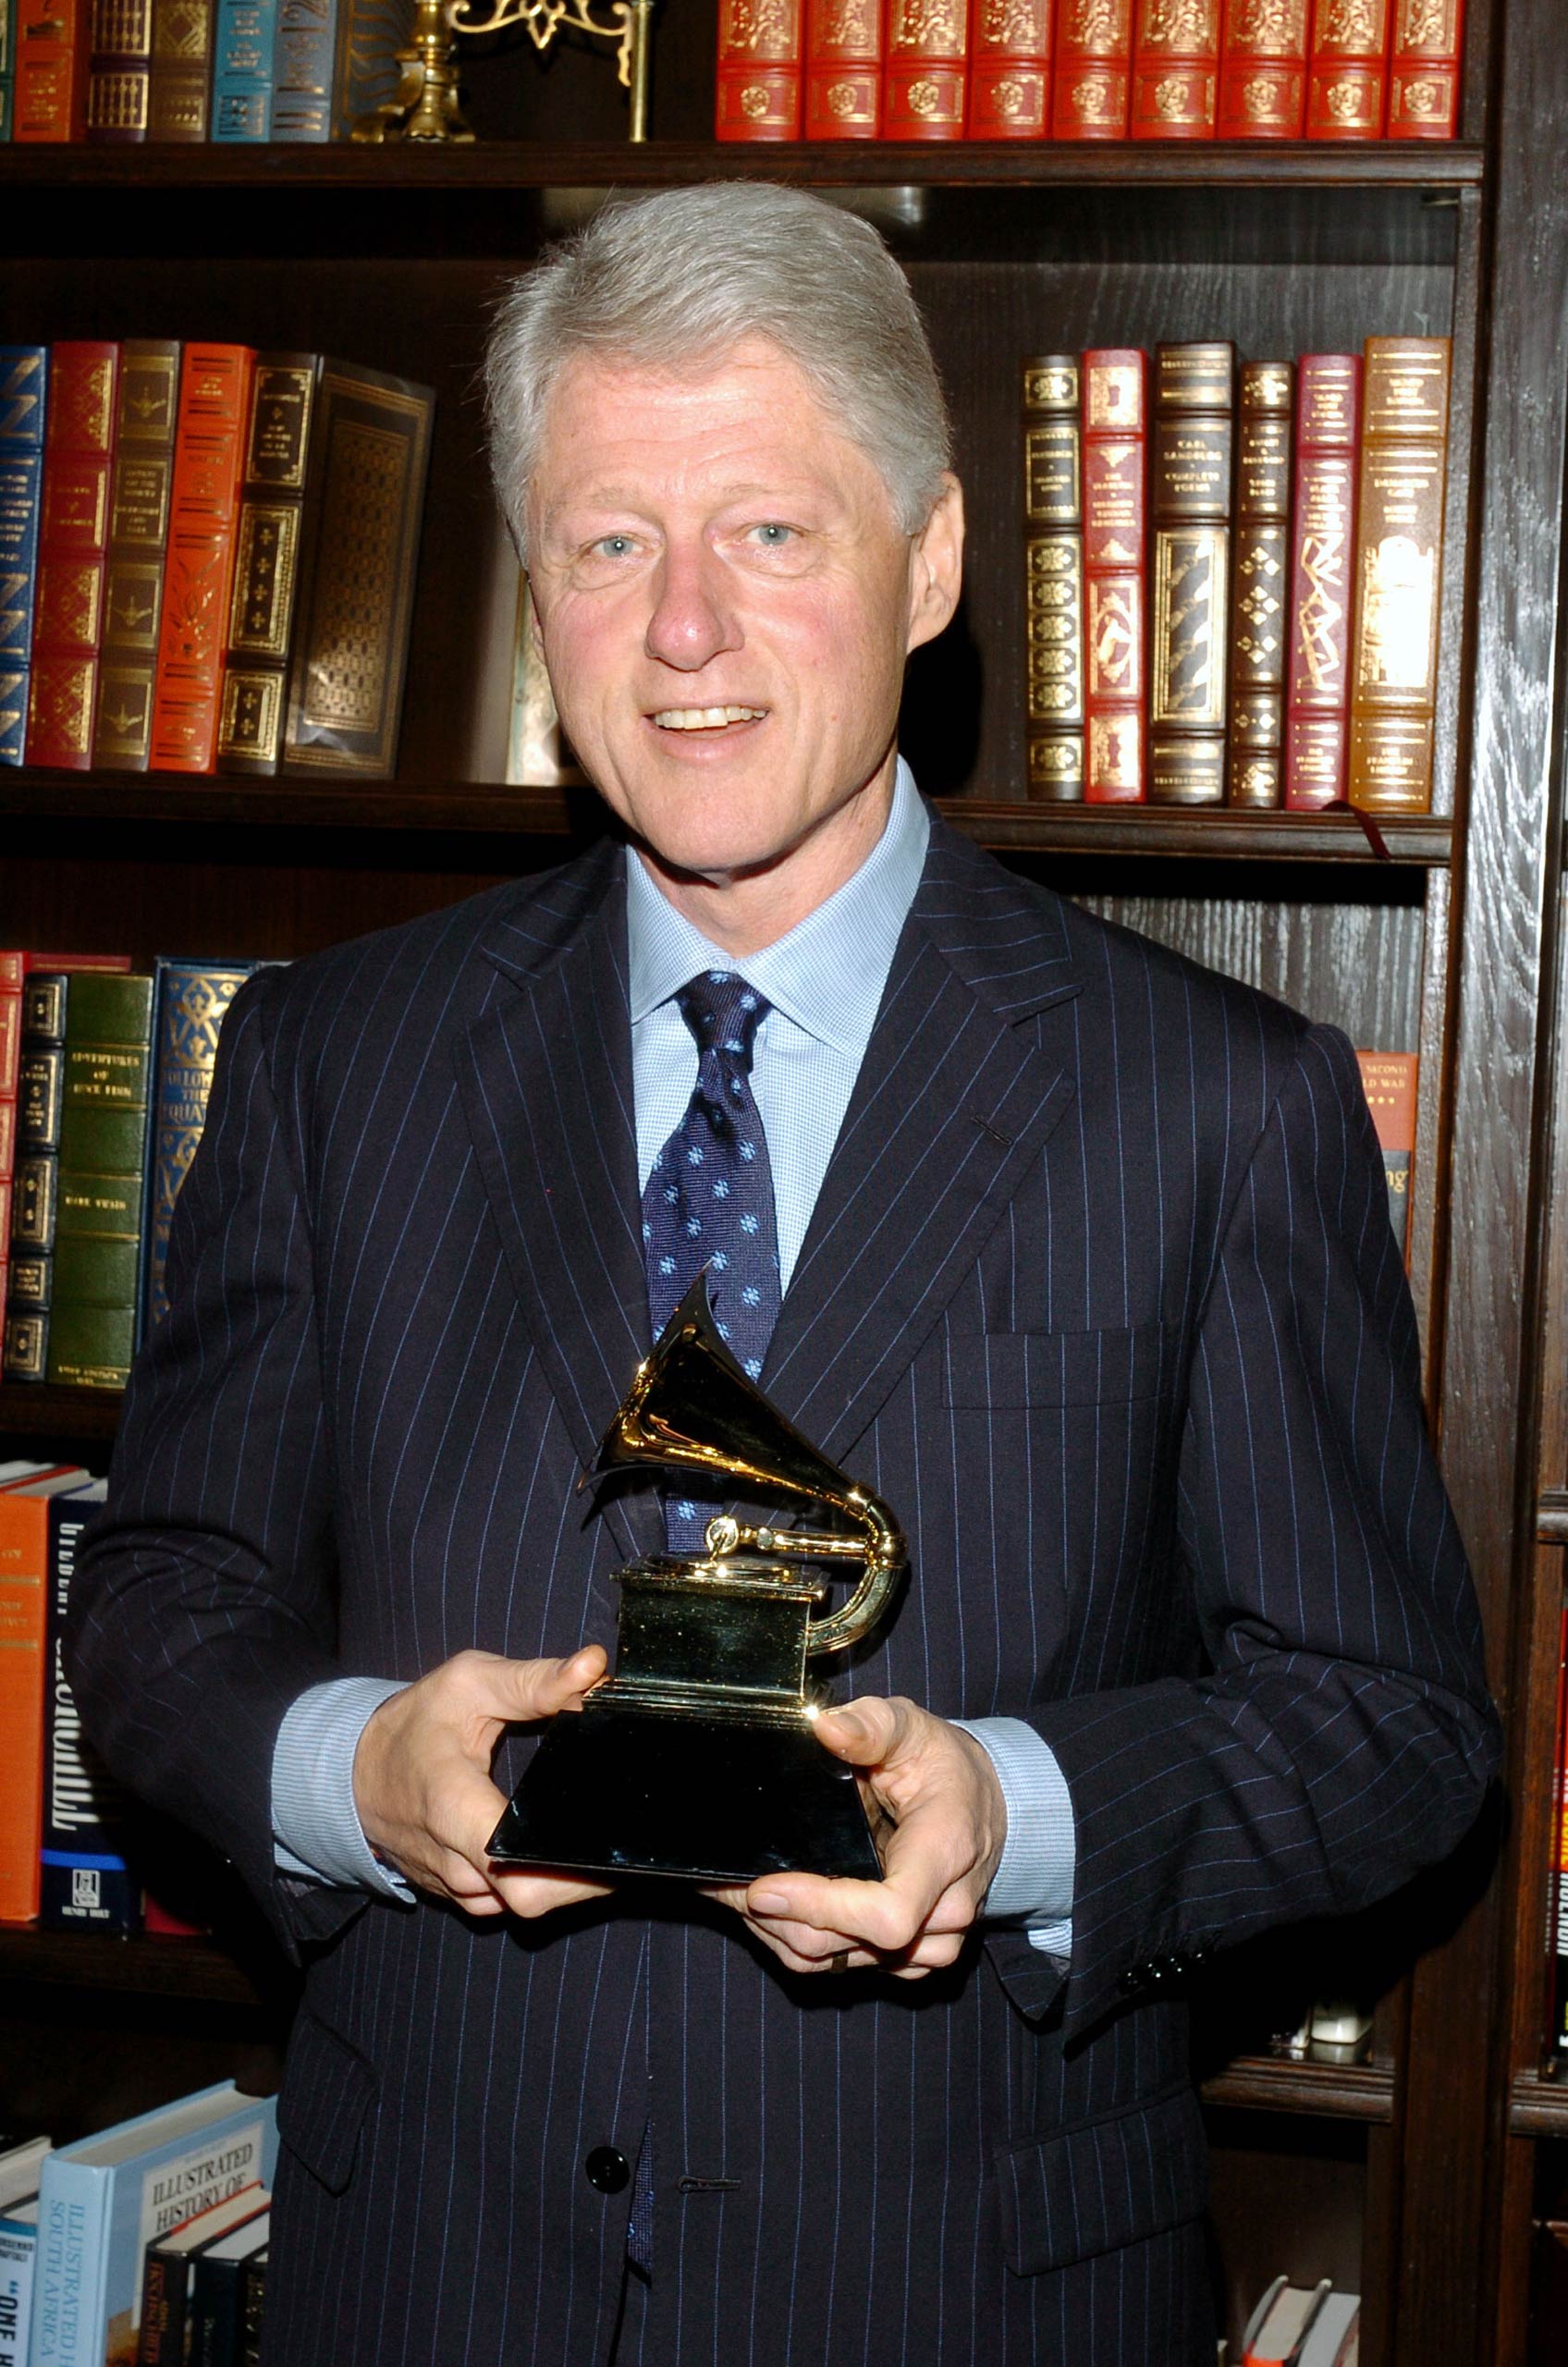 Bill Clinton Presented with His GRAMMY Award for Best Spoken Word Album for "My Life" - February 17, 2005